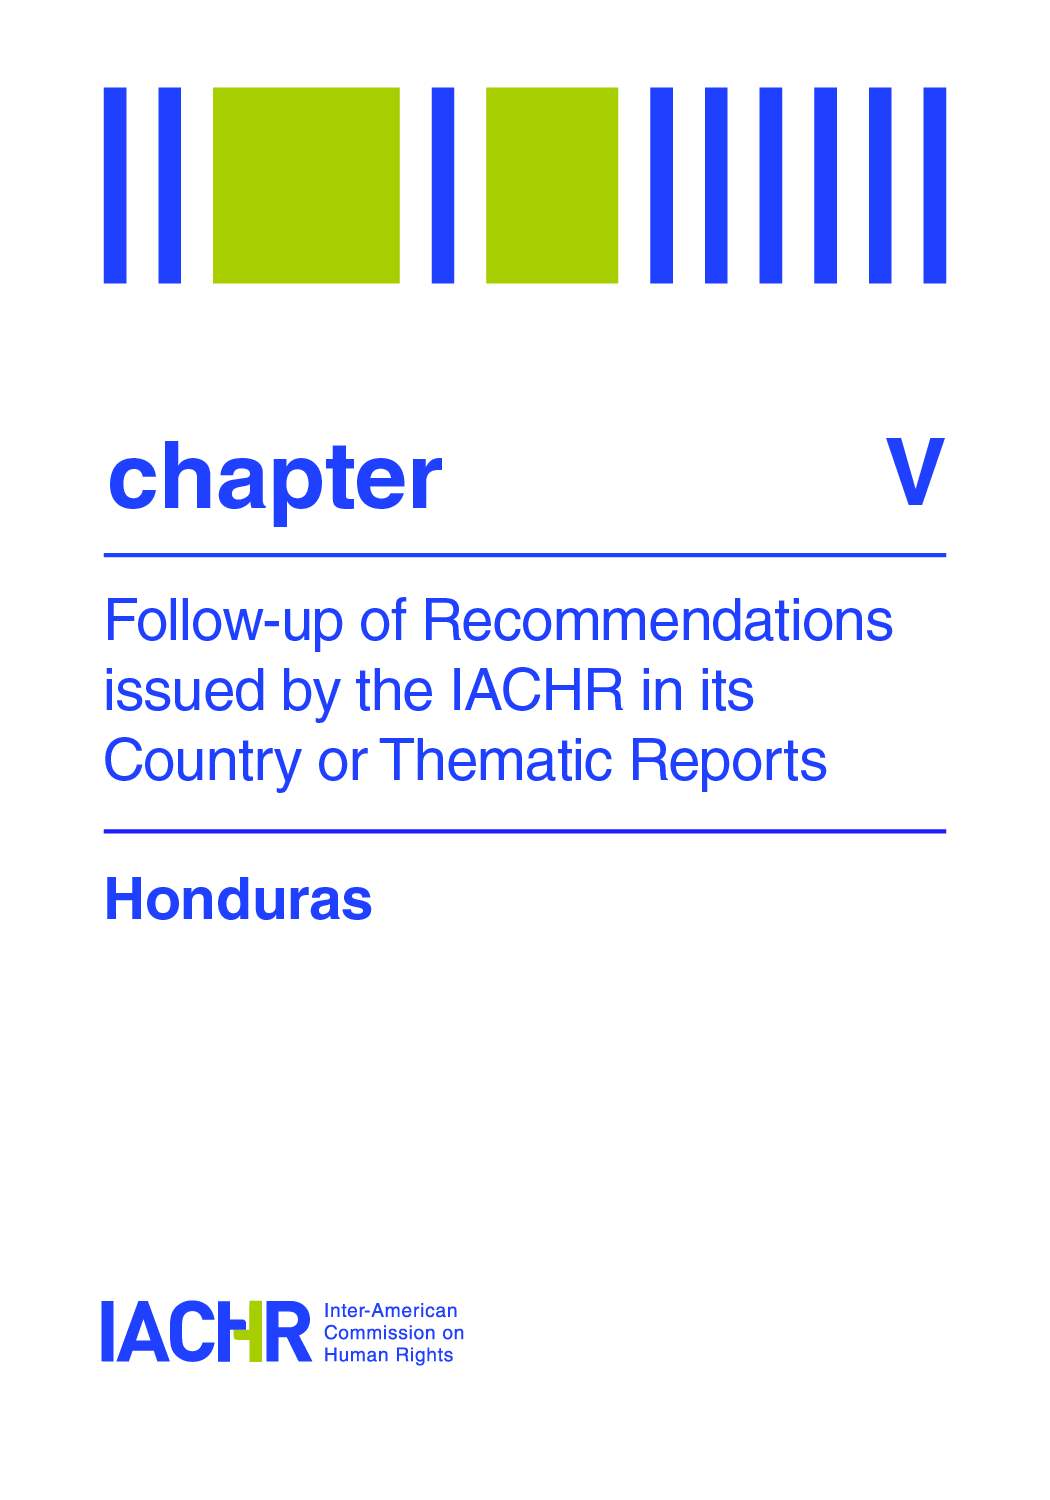 Second follow-up report on the recommendations made by the IACHR in the Report on the Situation of Human Rights in Honduras